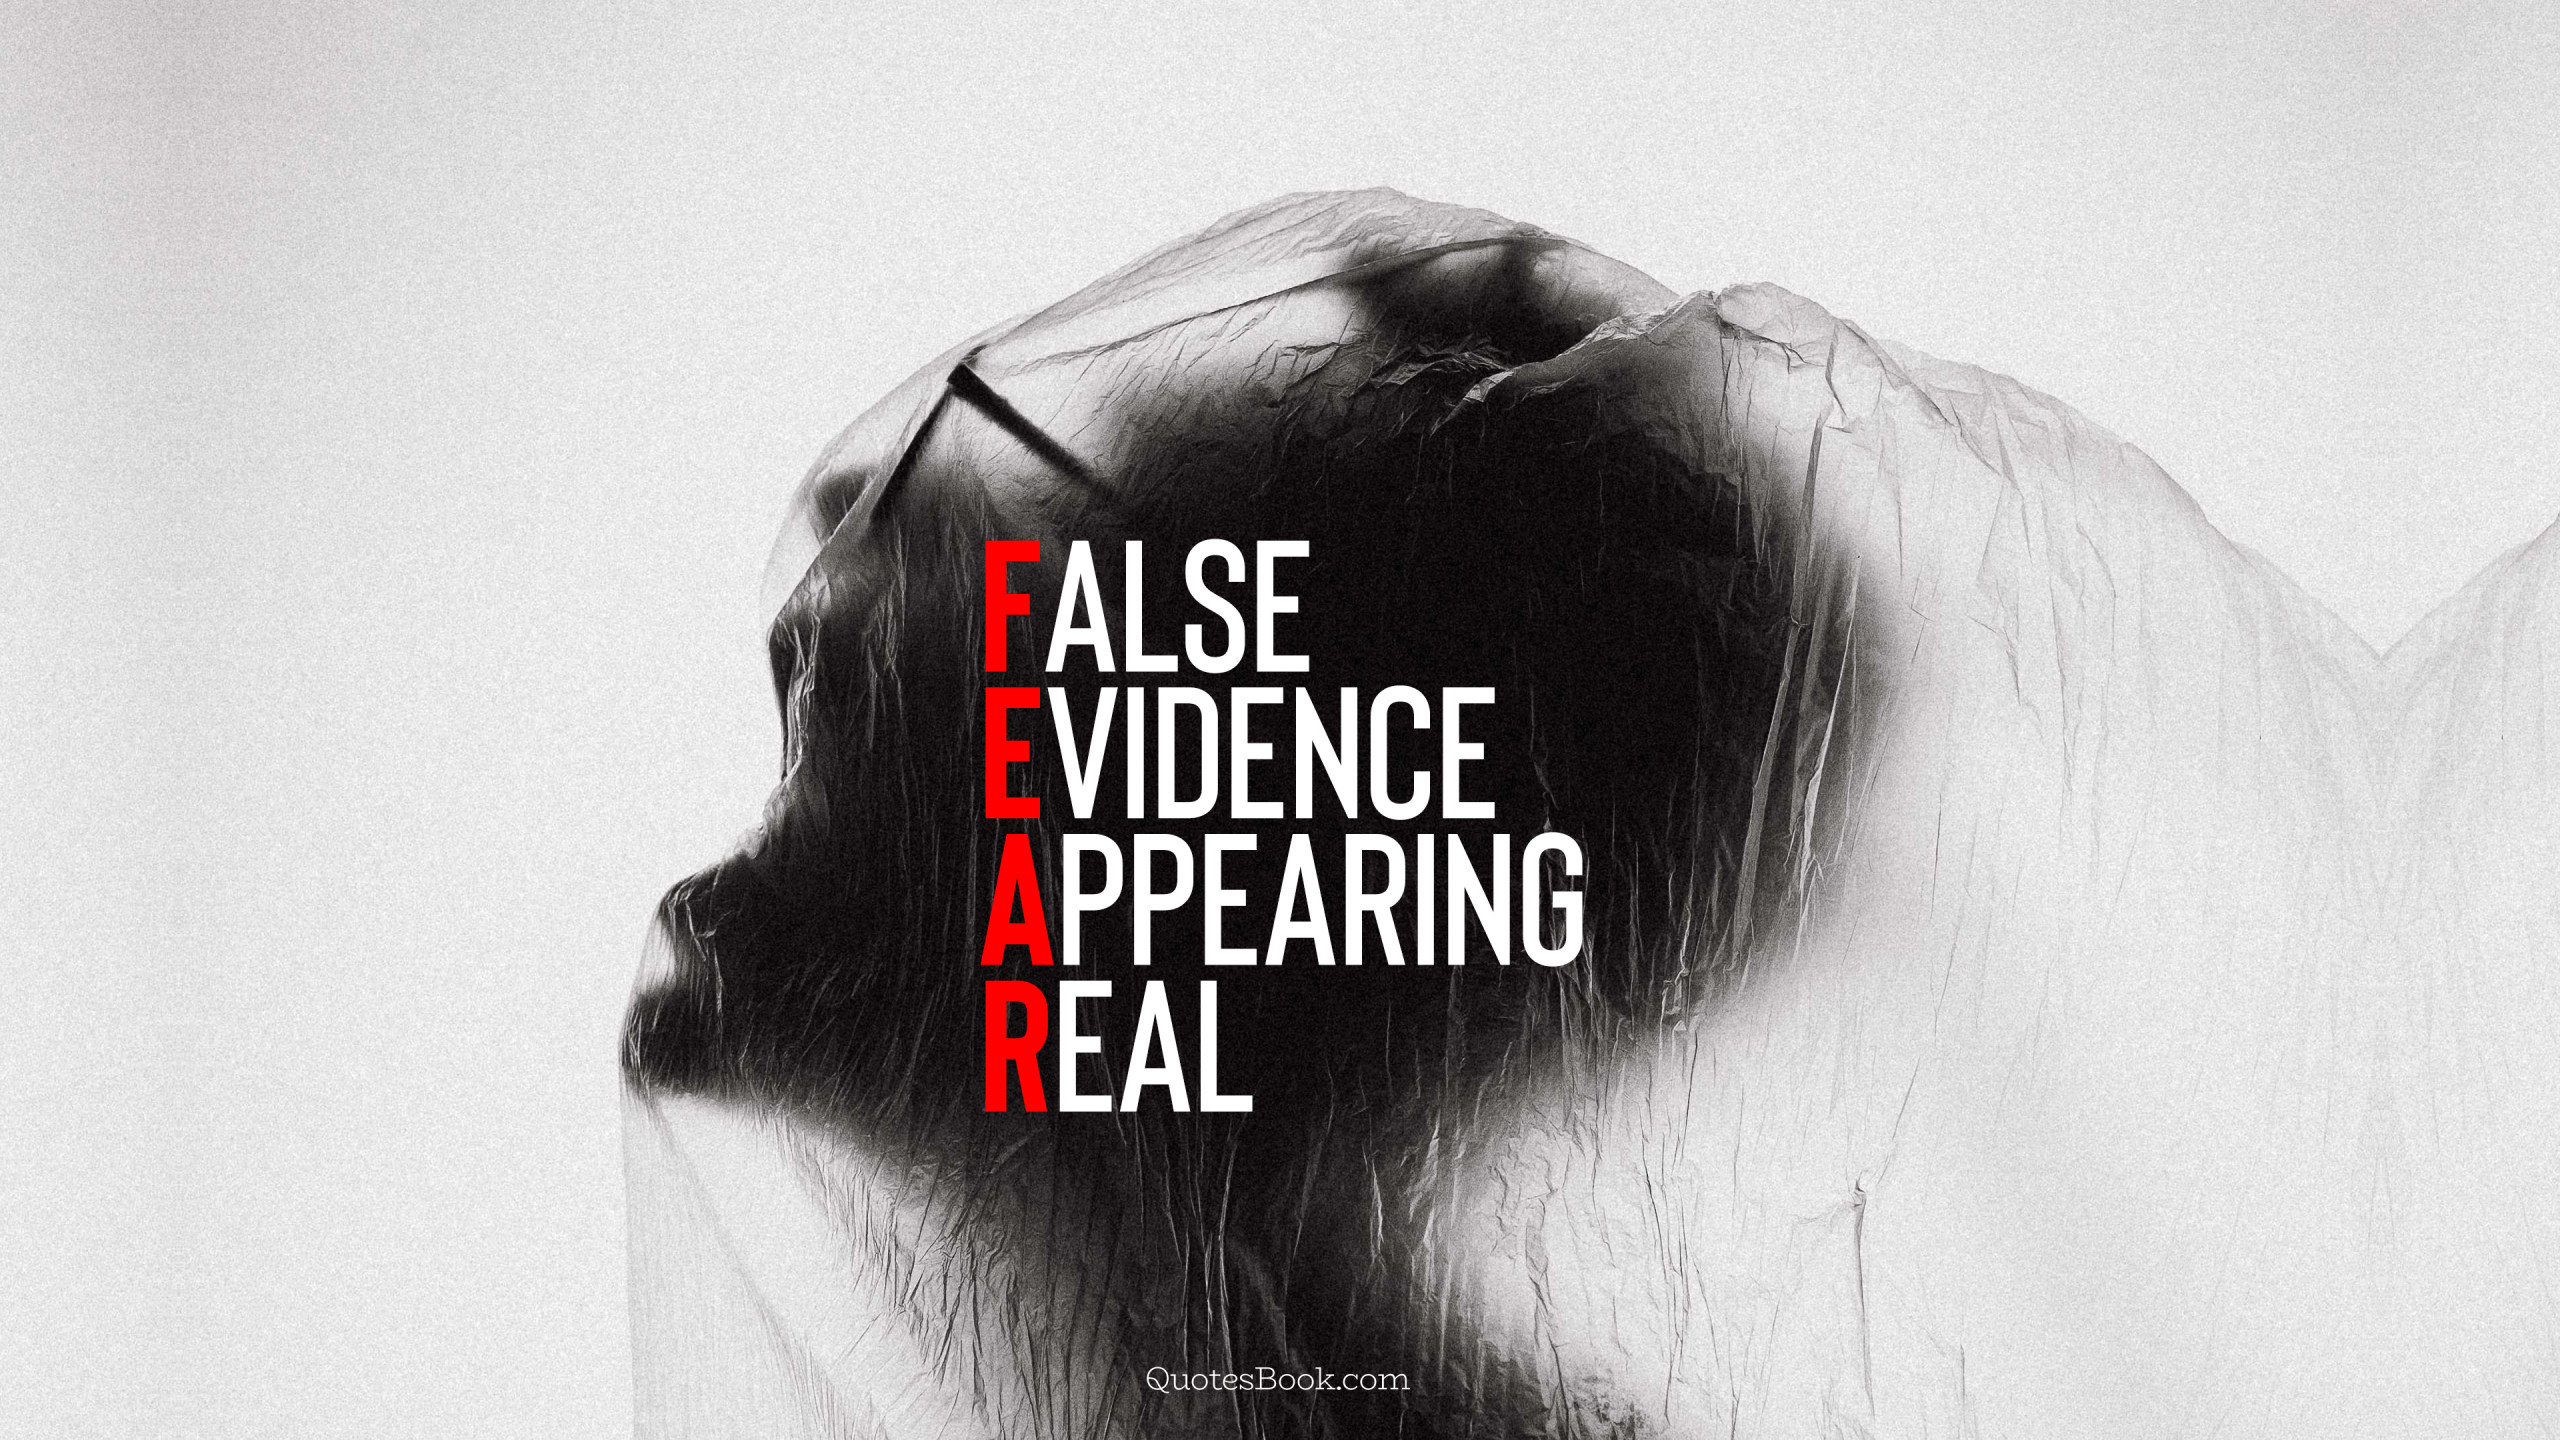 False evidence appearing real - QuotesBook